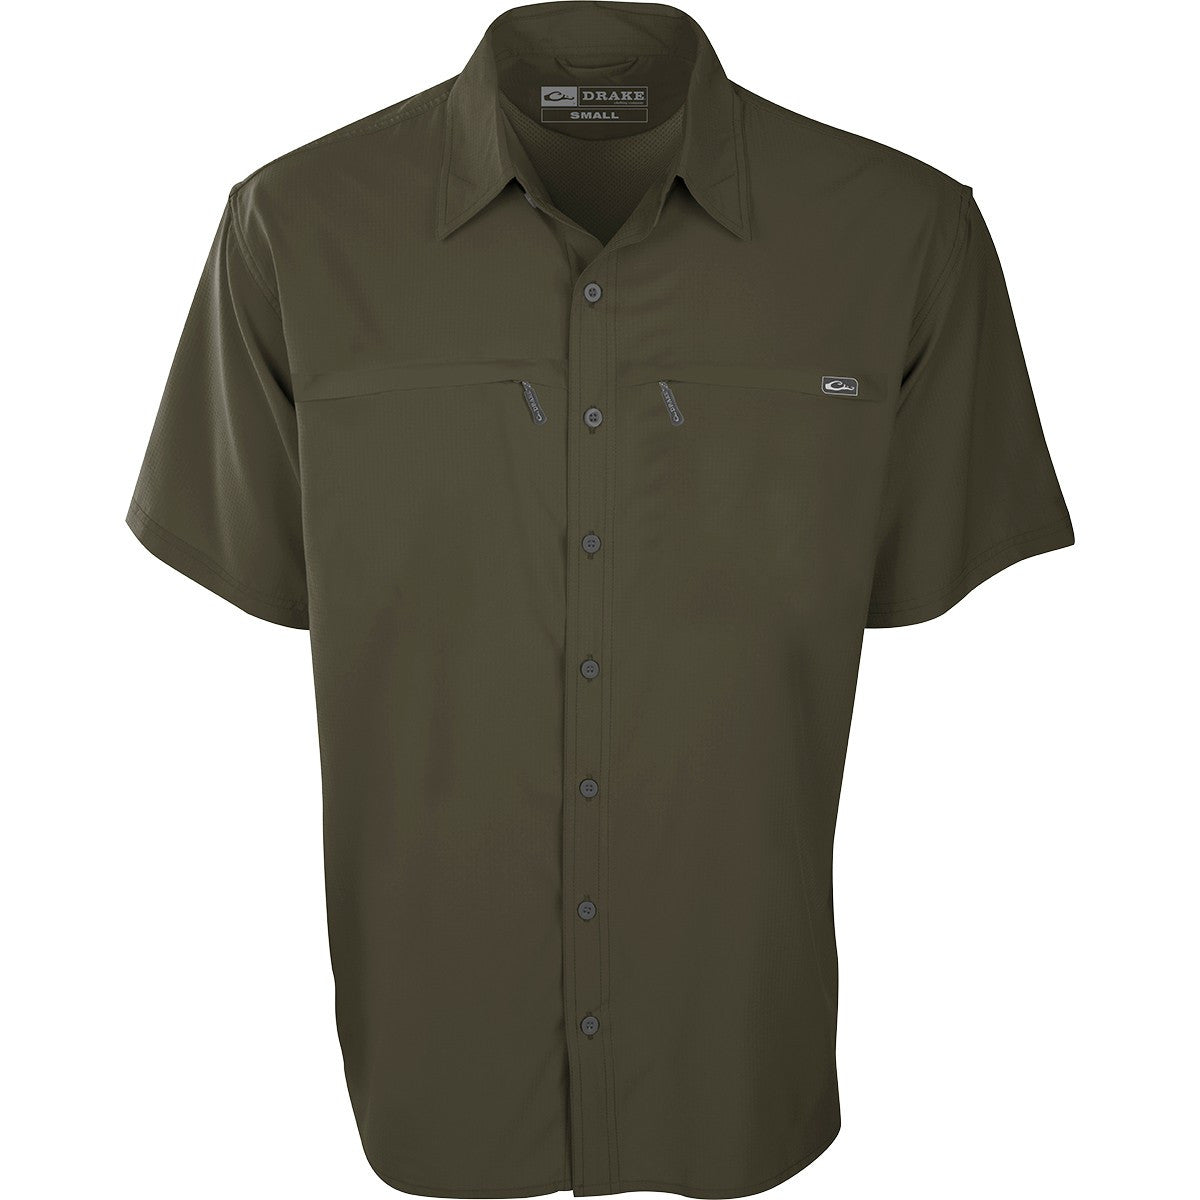 Drake DPF Town Lake Fishing Short Sleeve Shirt-Men's Clothing-Olive Night-S-Kevin's Fine Outdoor Gear & Apparel